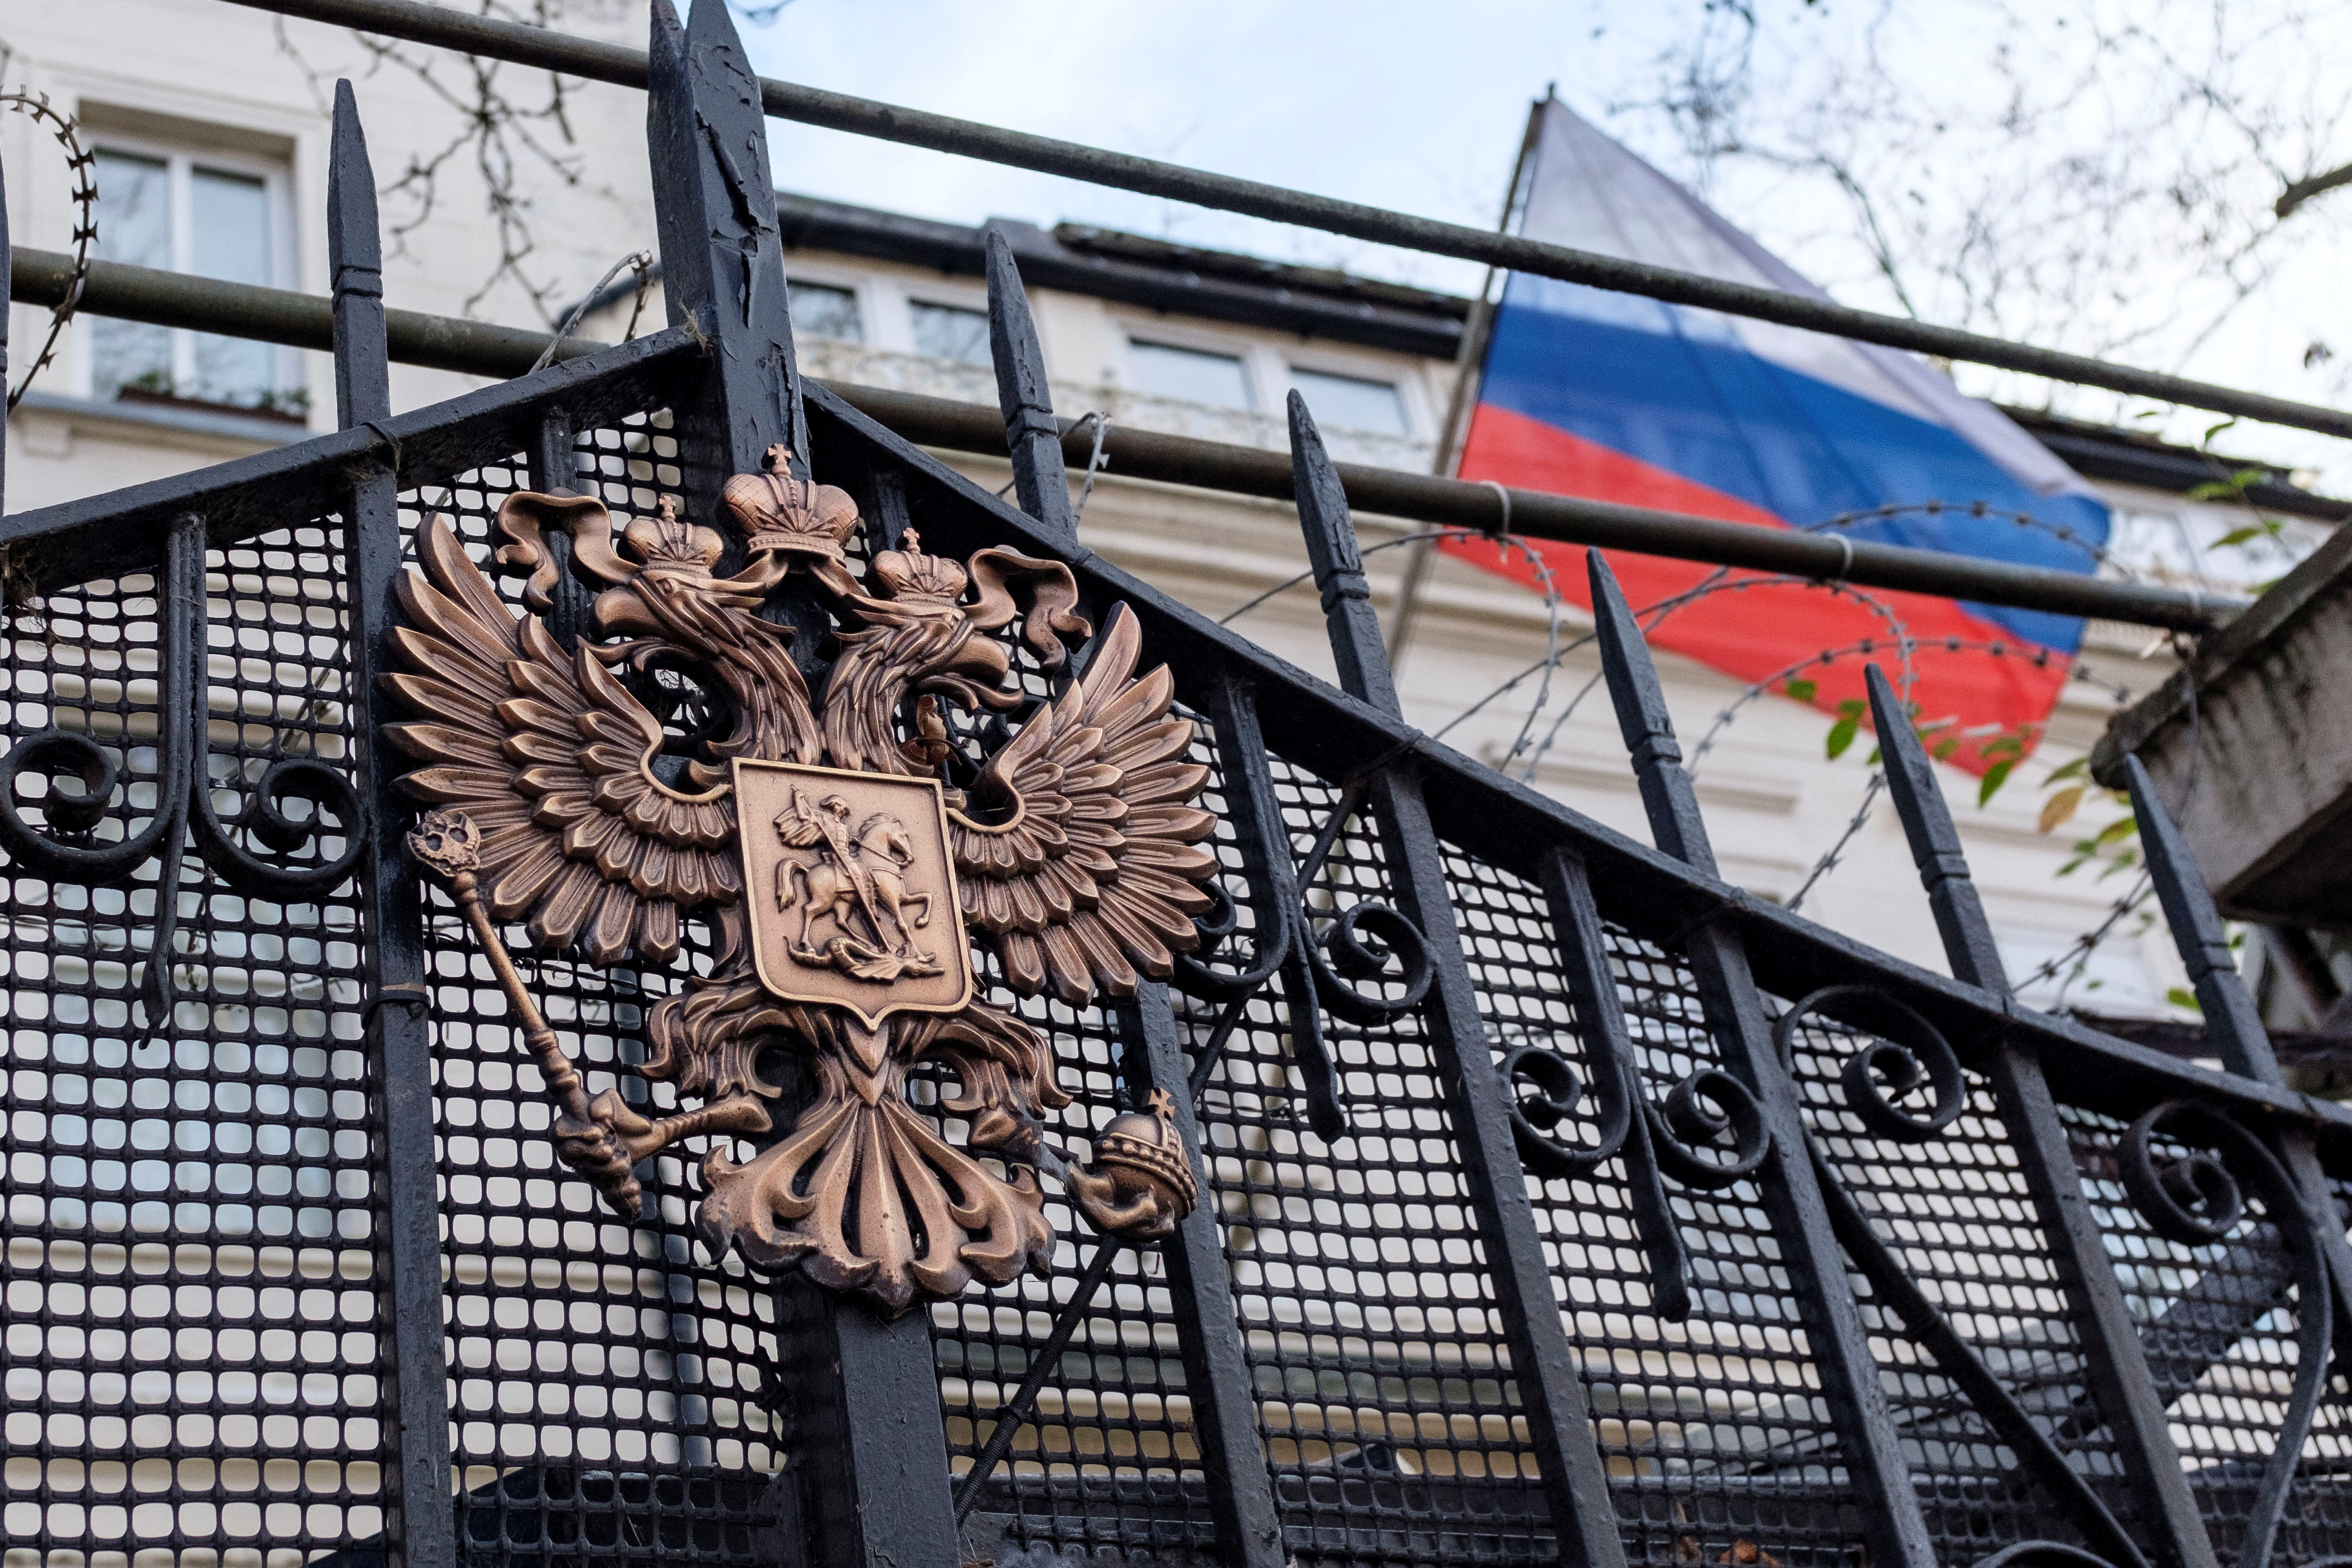 An emblem is displayed on the gate of the Russian Embassy in London